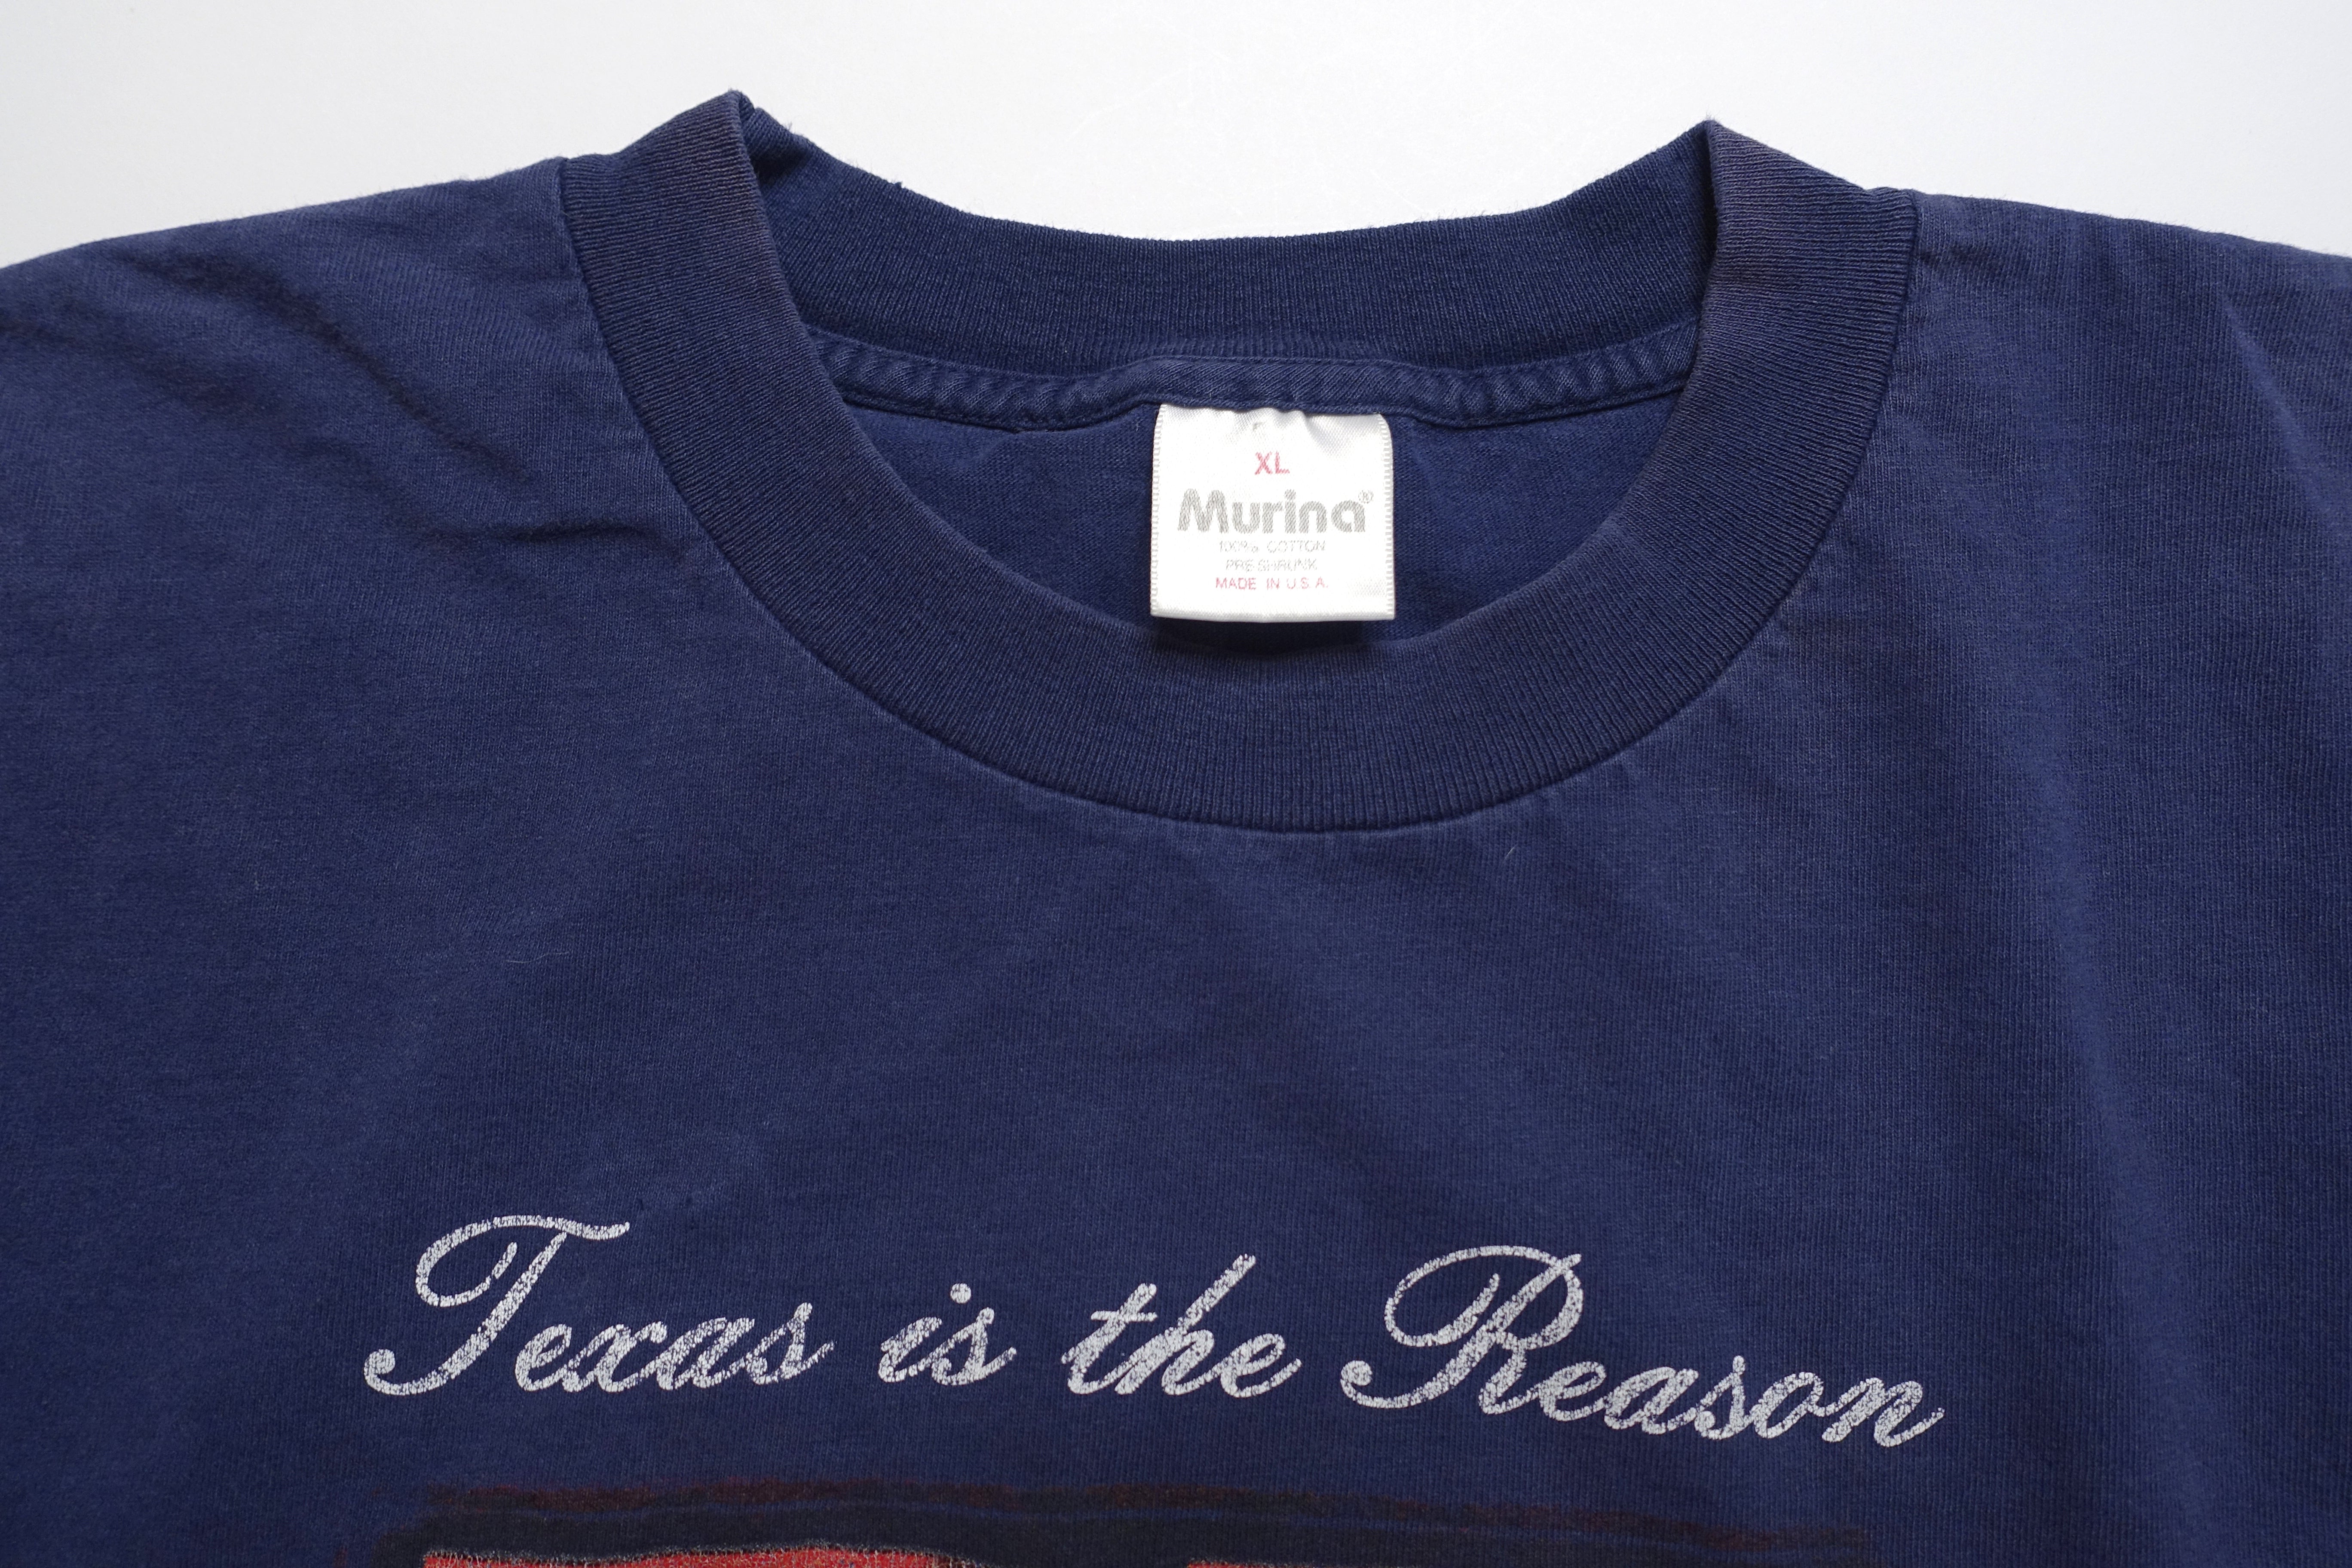 Texas Is The Reason - Do You Know Who You Are? Rev Shirt Size XL